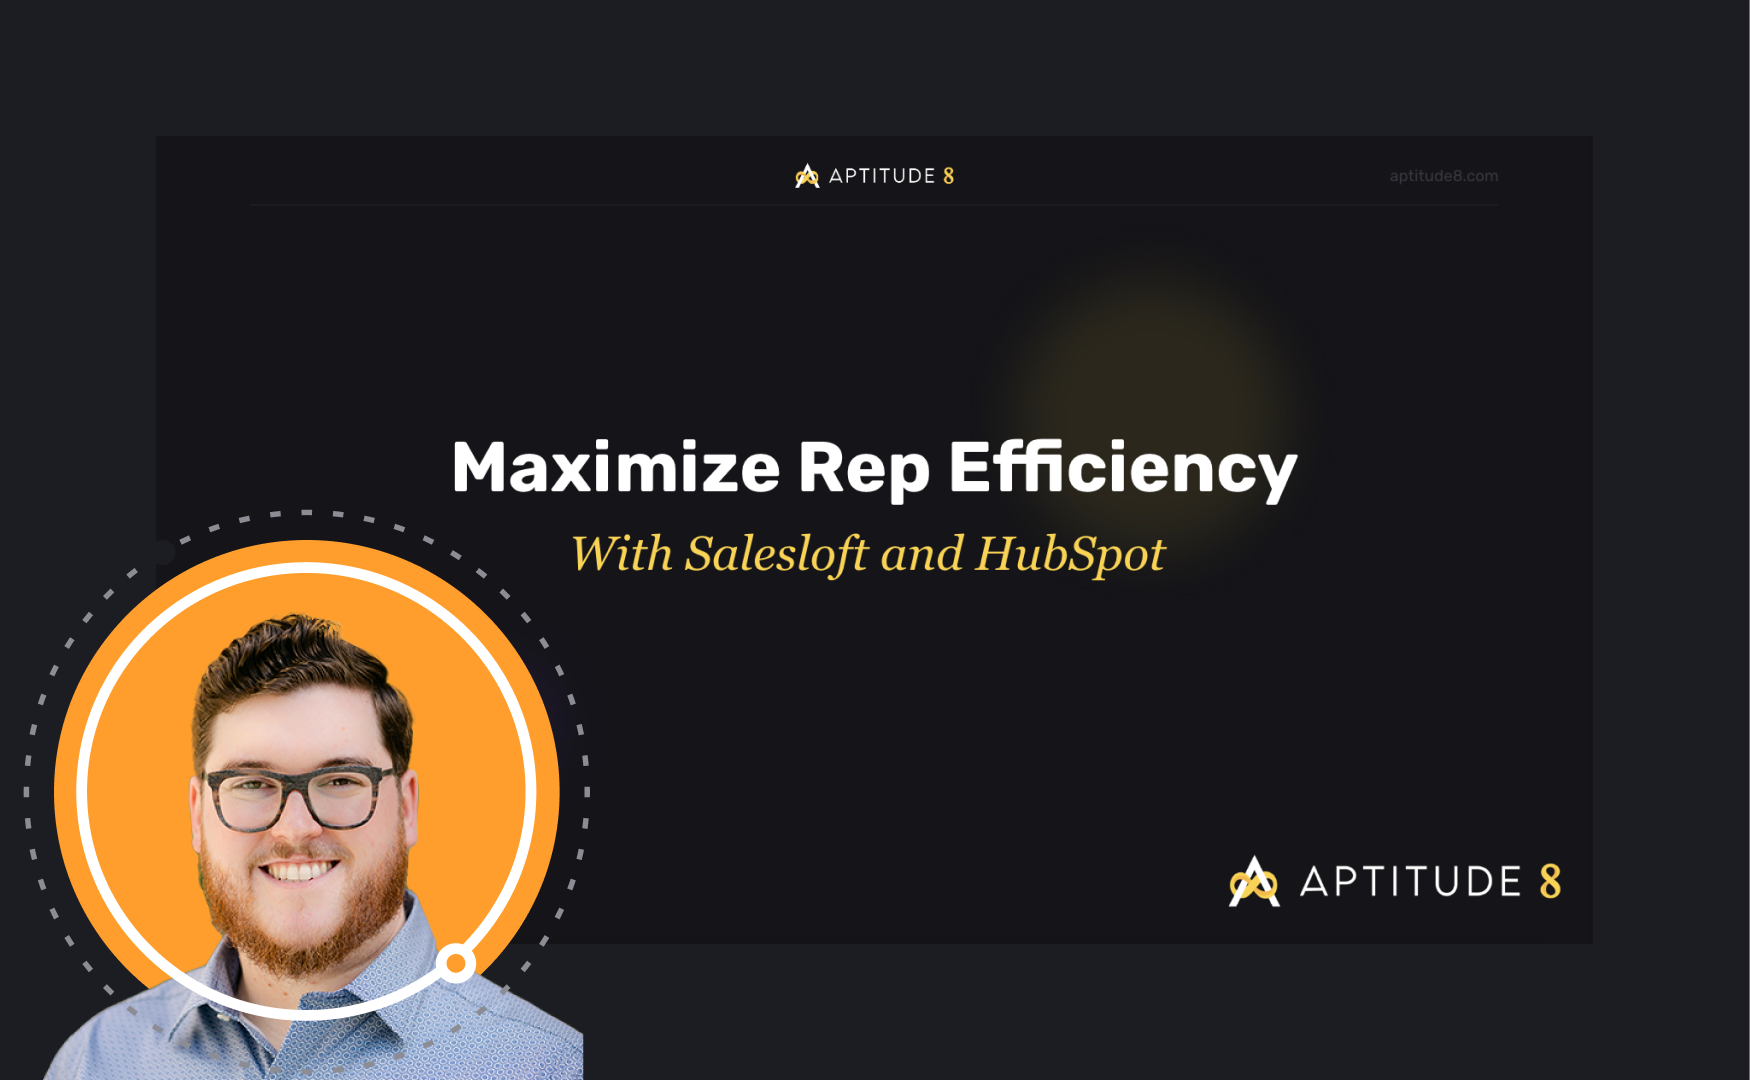 Maximize Rep Efficiency with Salesloft and HubSpot